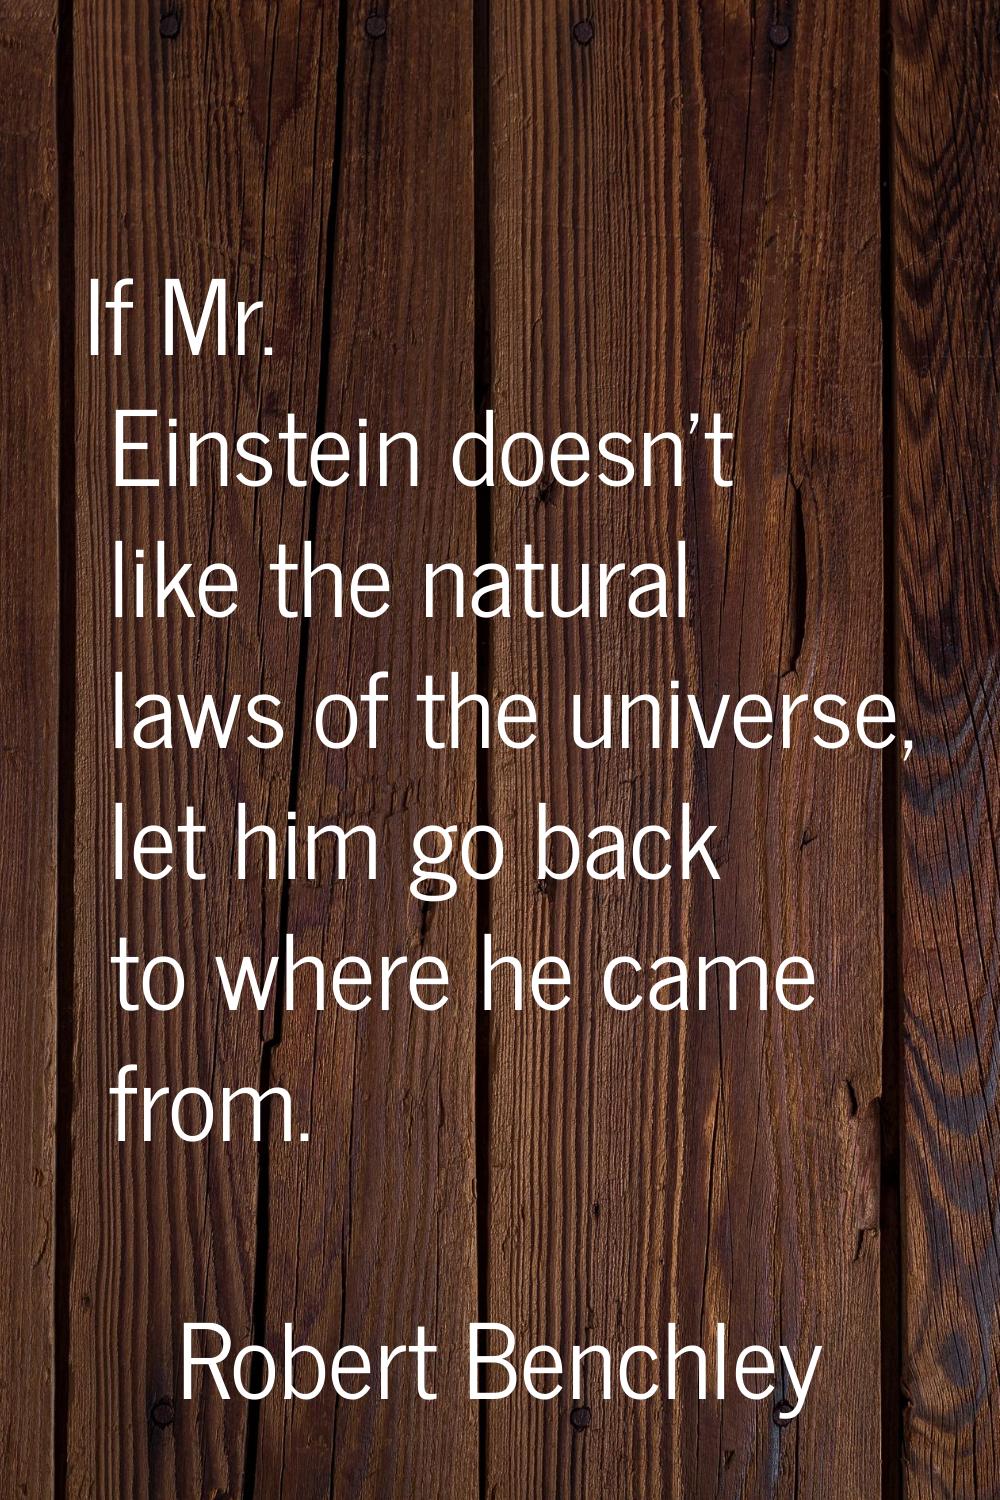 If Mr. Einstein doesn't like the natural laws of the universe, let him go back to where he came fro